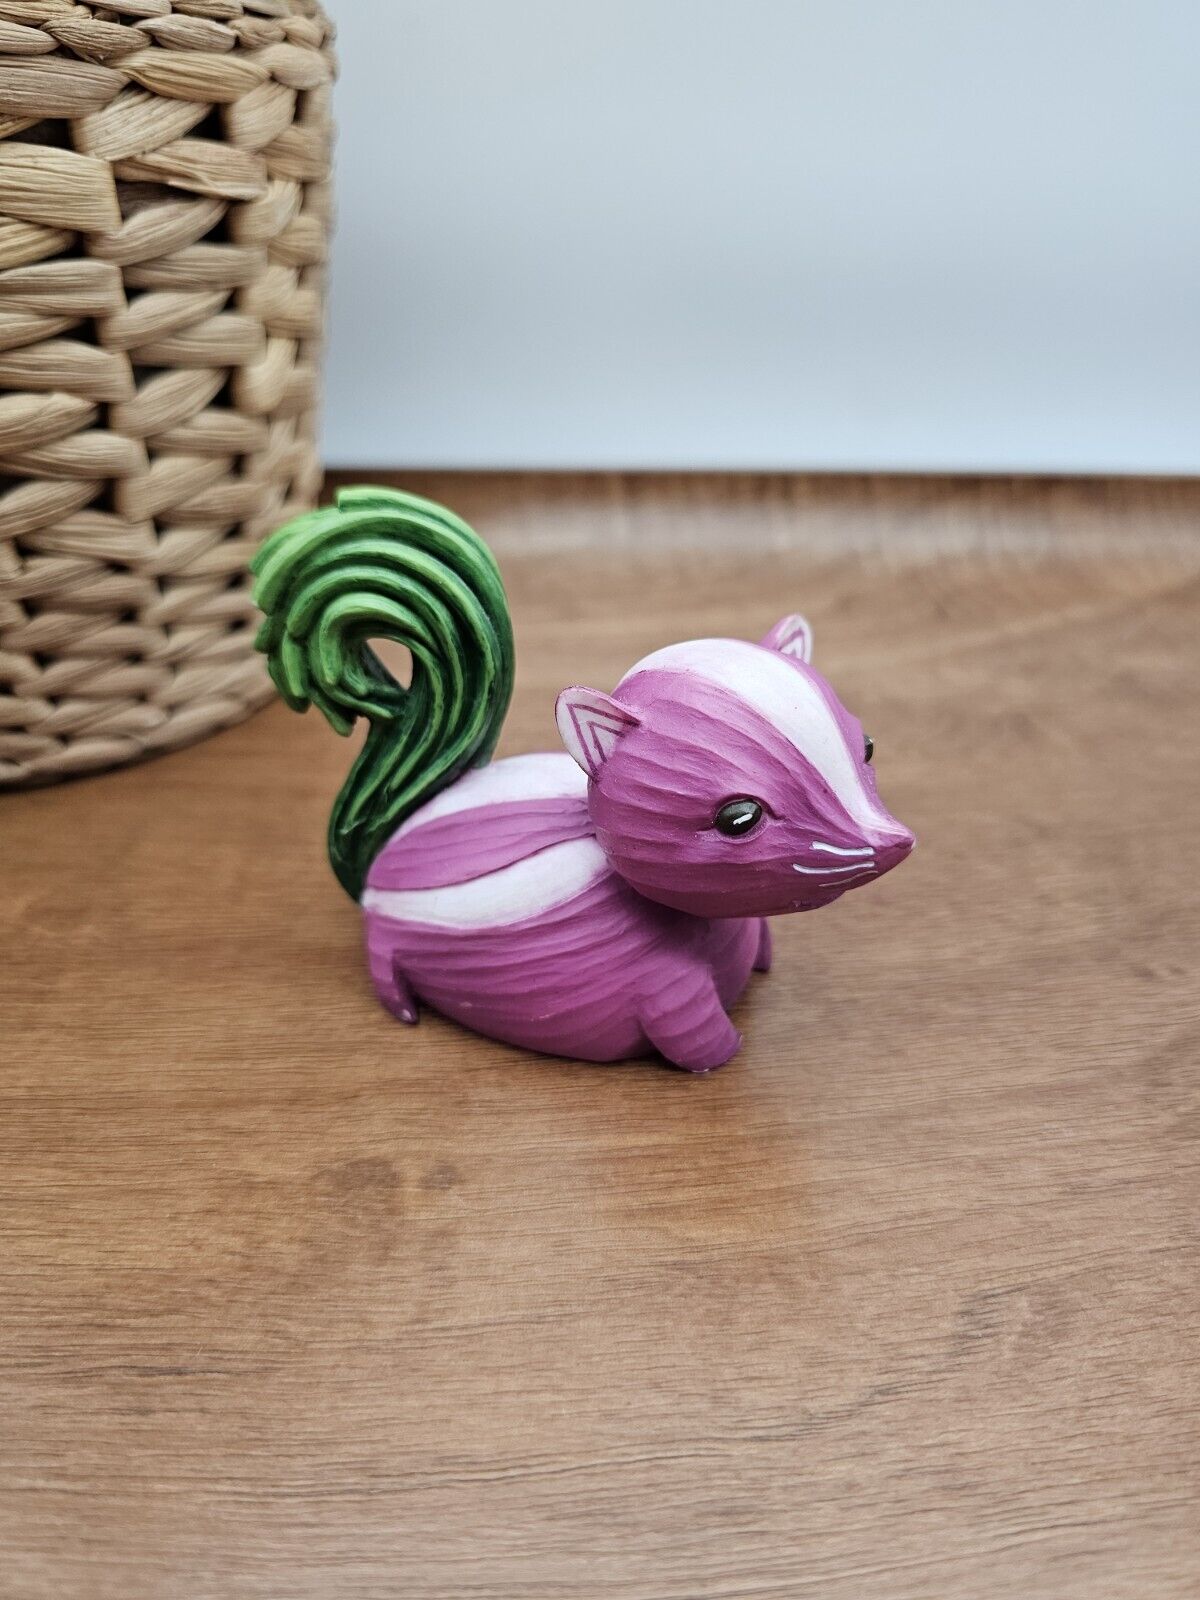 2010 Home Grown by Enesco Purple Onion Skunk Collectible Resin Figurine 4020984